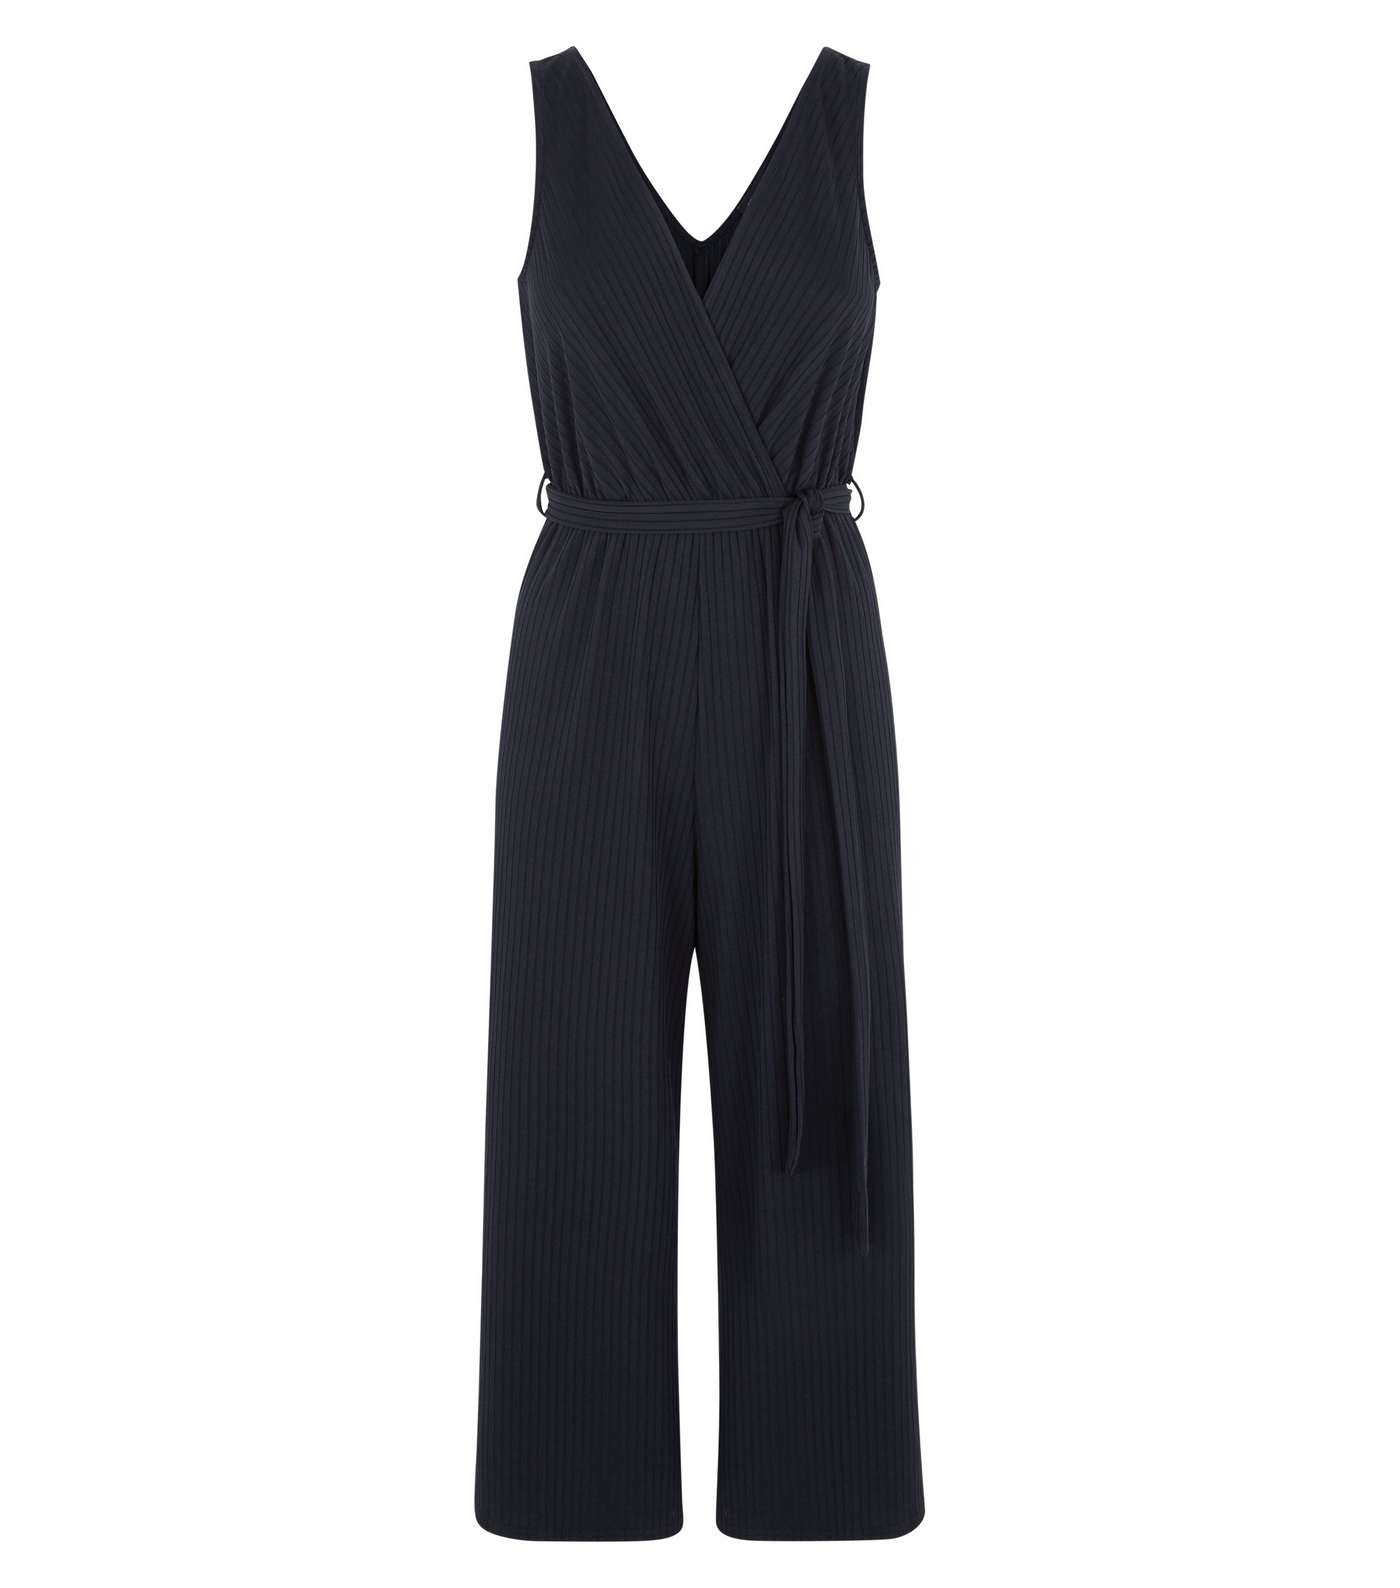 Black Ribbed Sleeveless Jersey Culotte Jumpsuit  Image 3